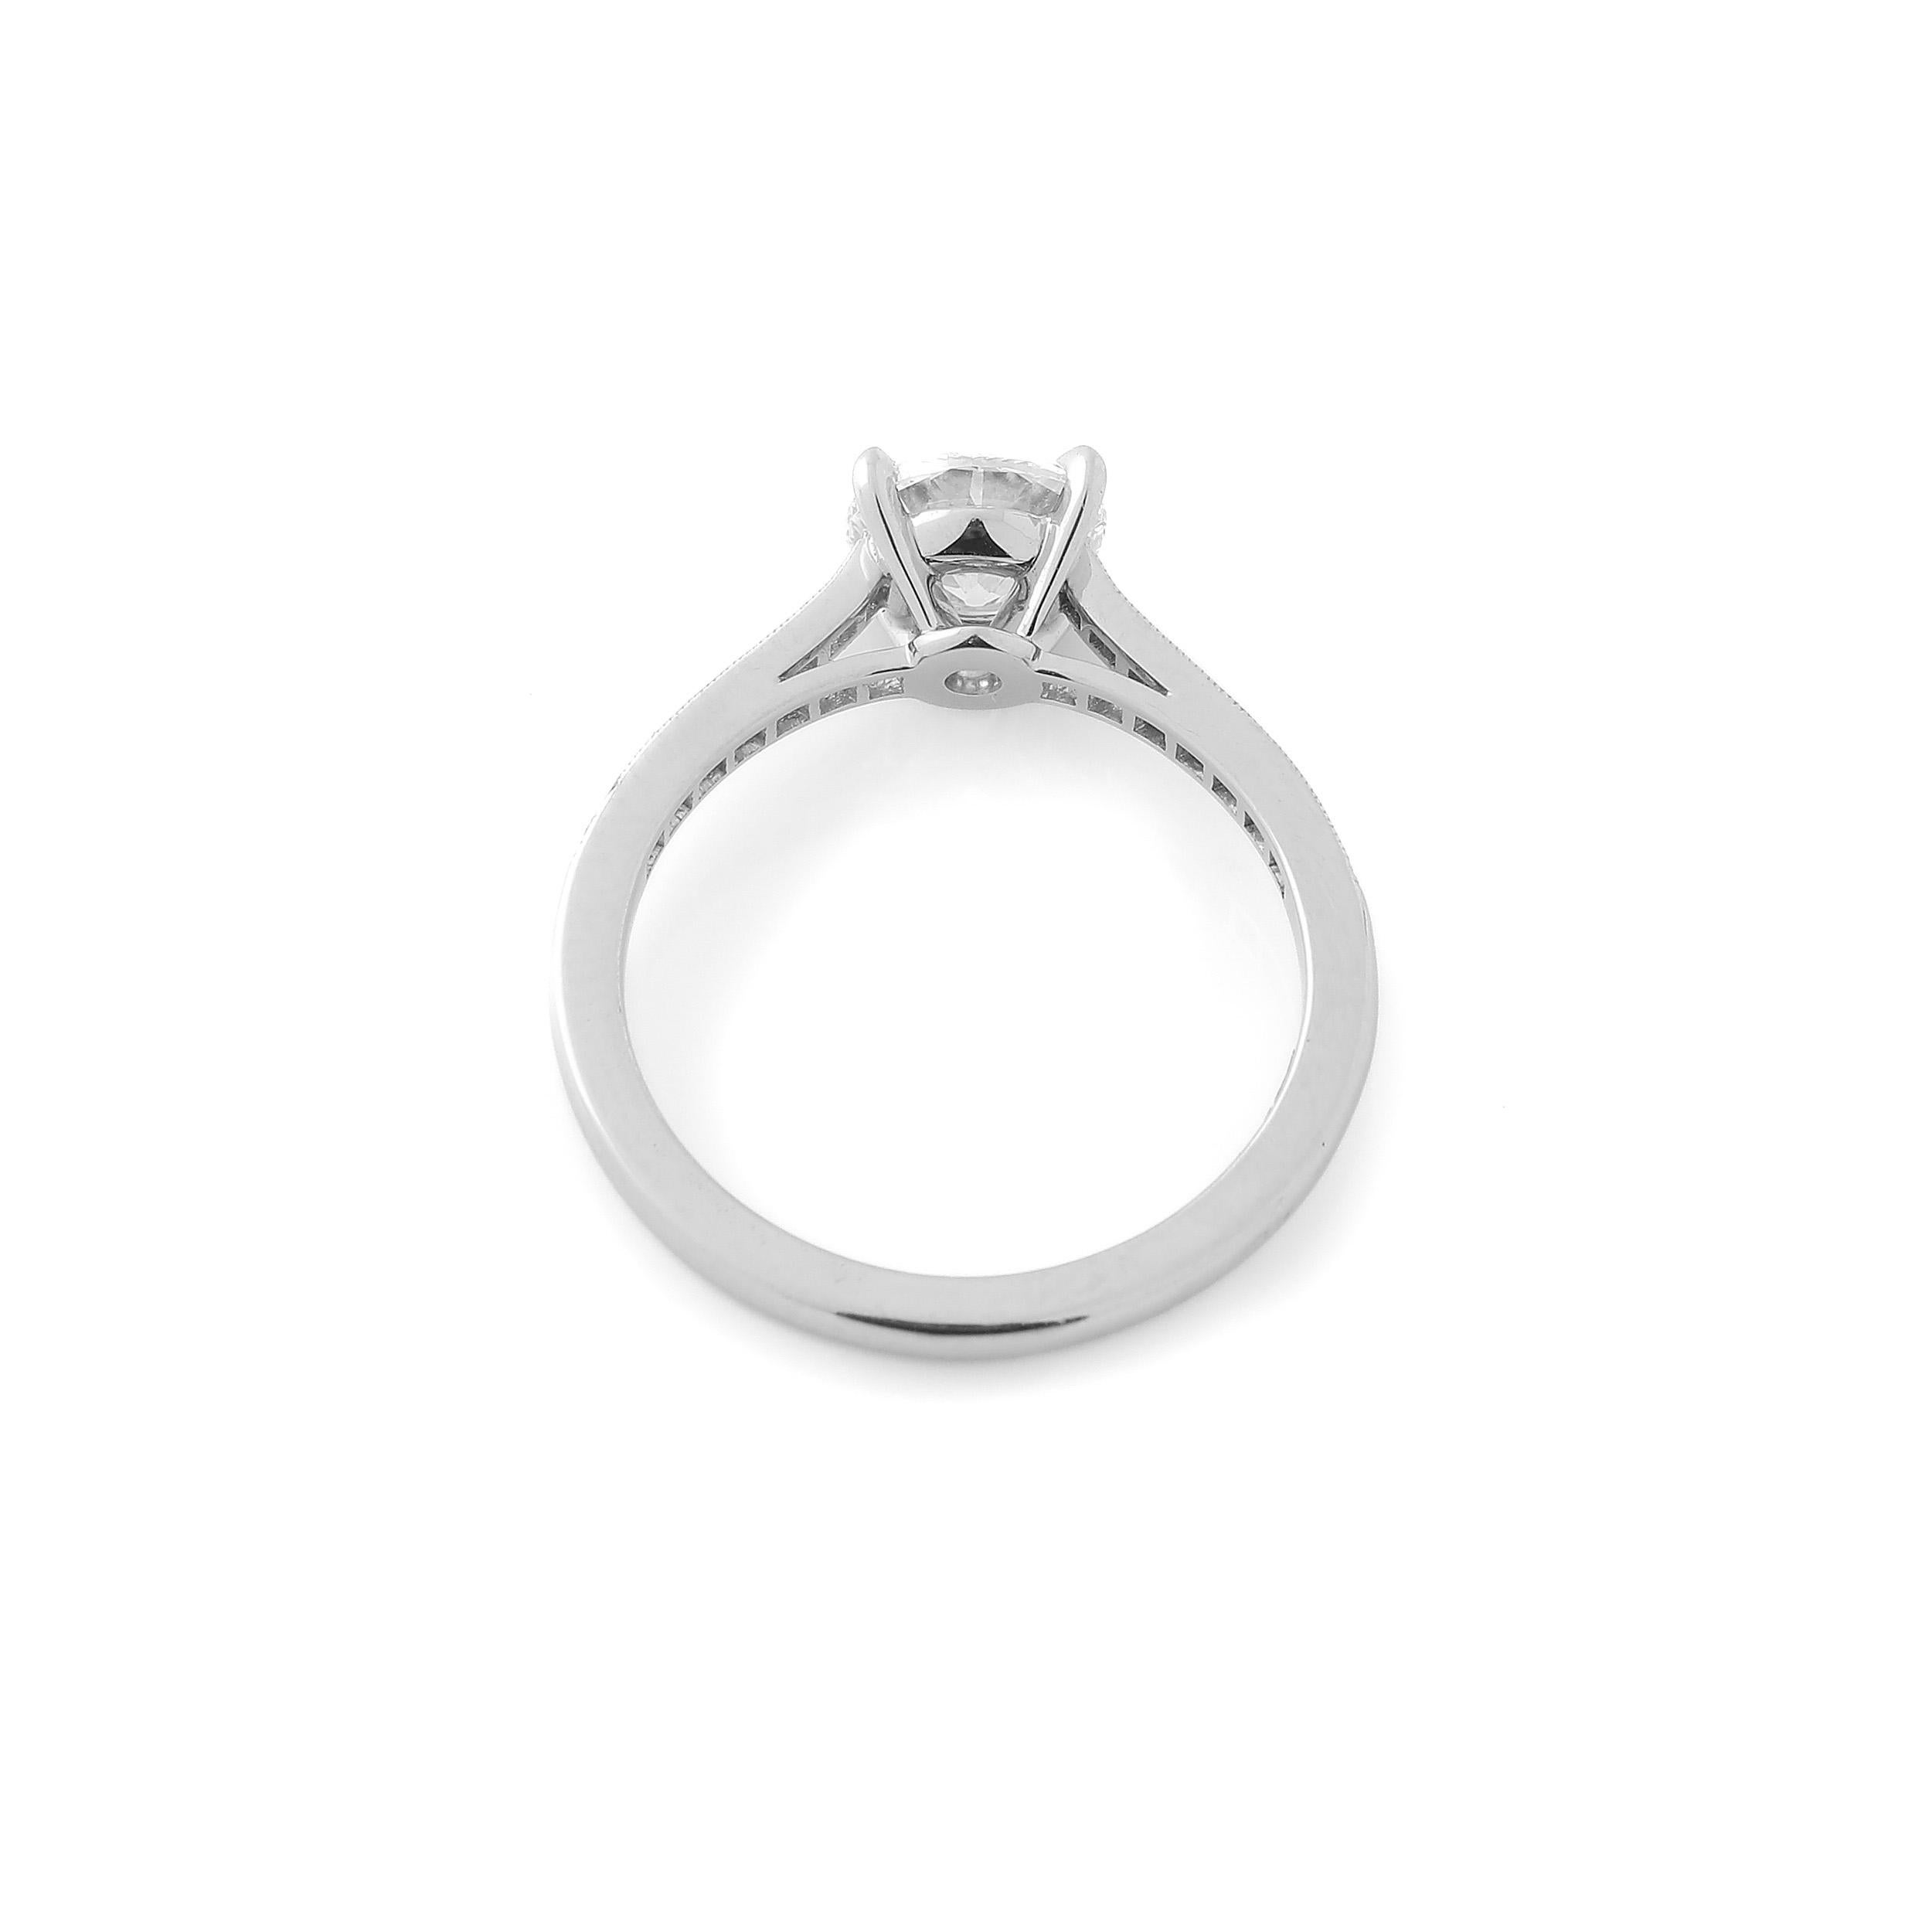 Round Cut GIA Certified 1.04 Carat F VS1 Round Brilliant Old Cut Diamond Solitaire Ring For Sale